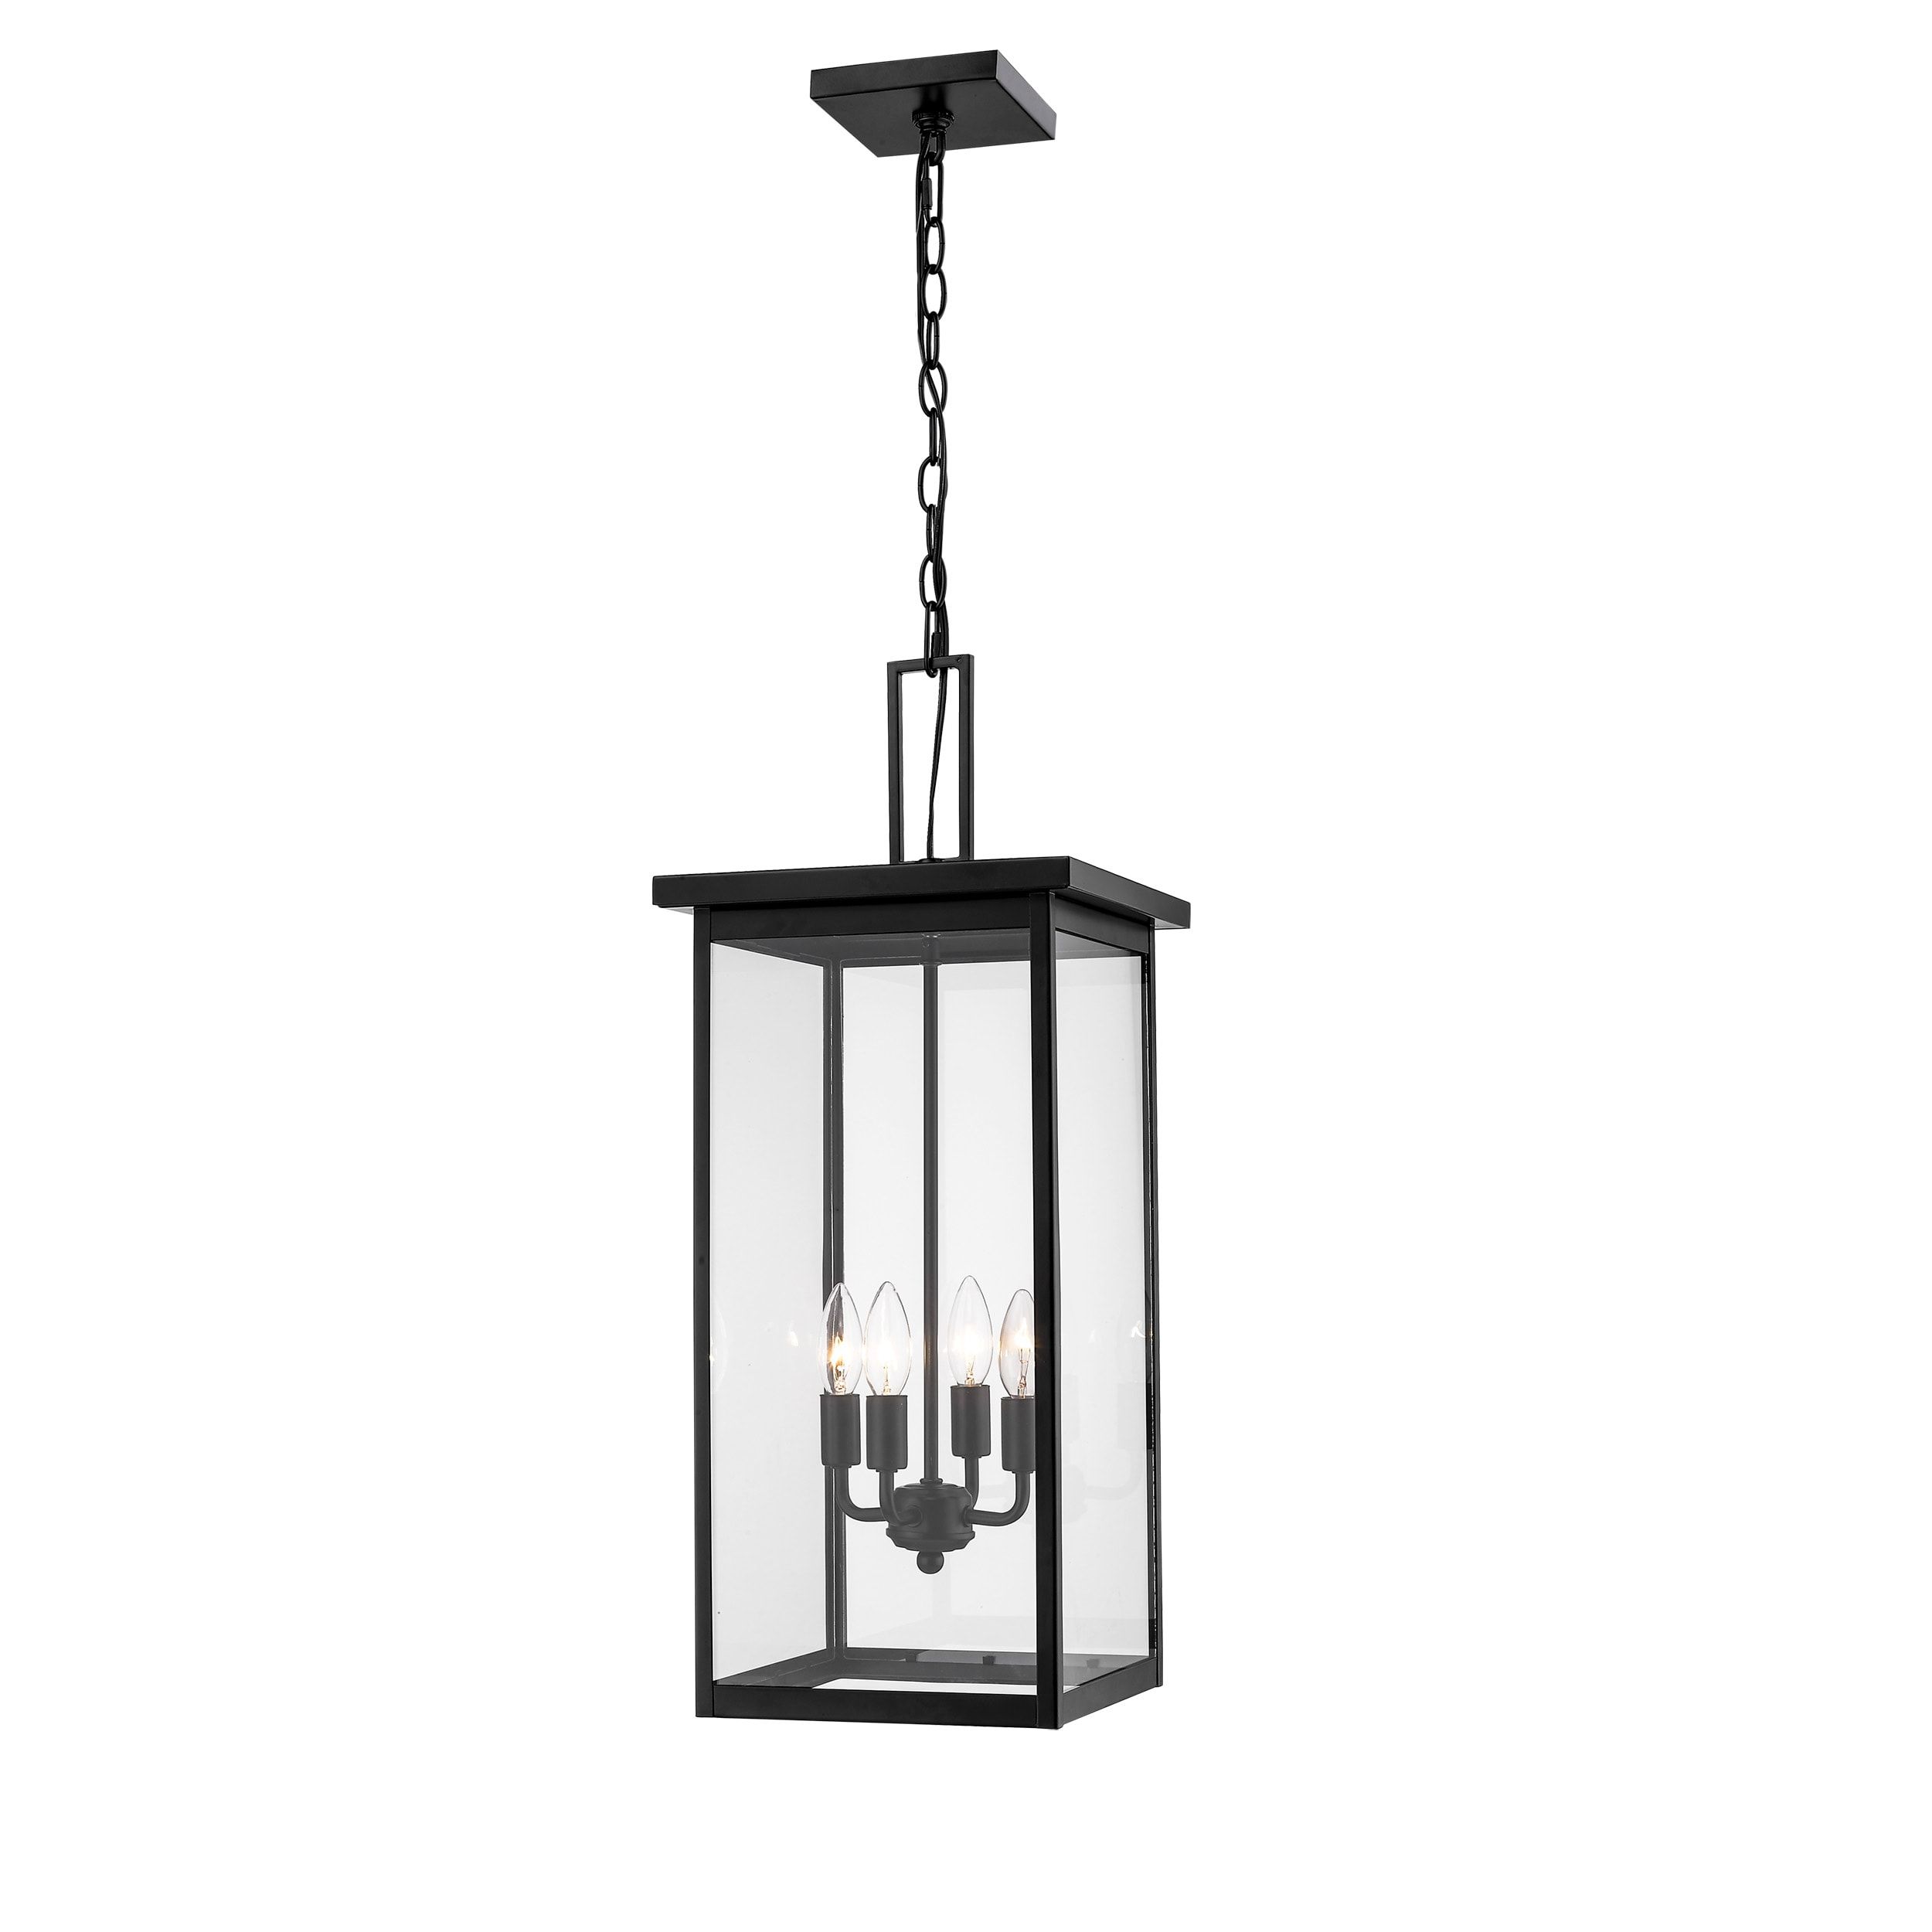 Millennium Lighting Barkeley 4 Light Powder Coat Black Transitional Clear  Glass Lantern Outdoor Pendant Light In The Pendant Lighting Department At  Lowes Intended For Black Powder Coat Lantern Chandeliers (View 5 of 15)